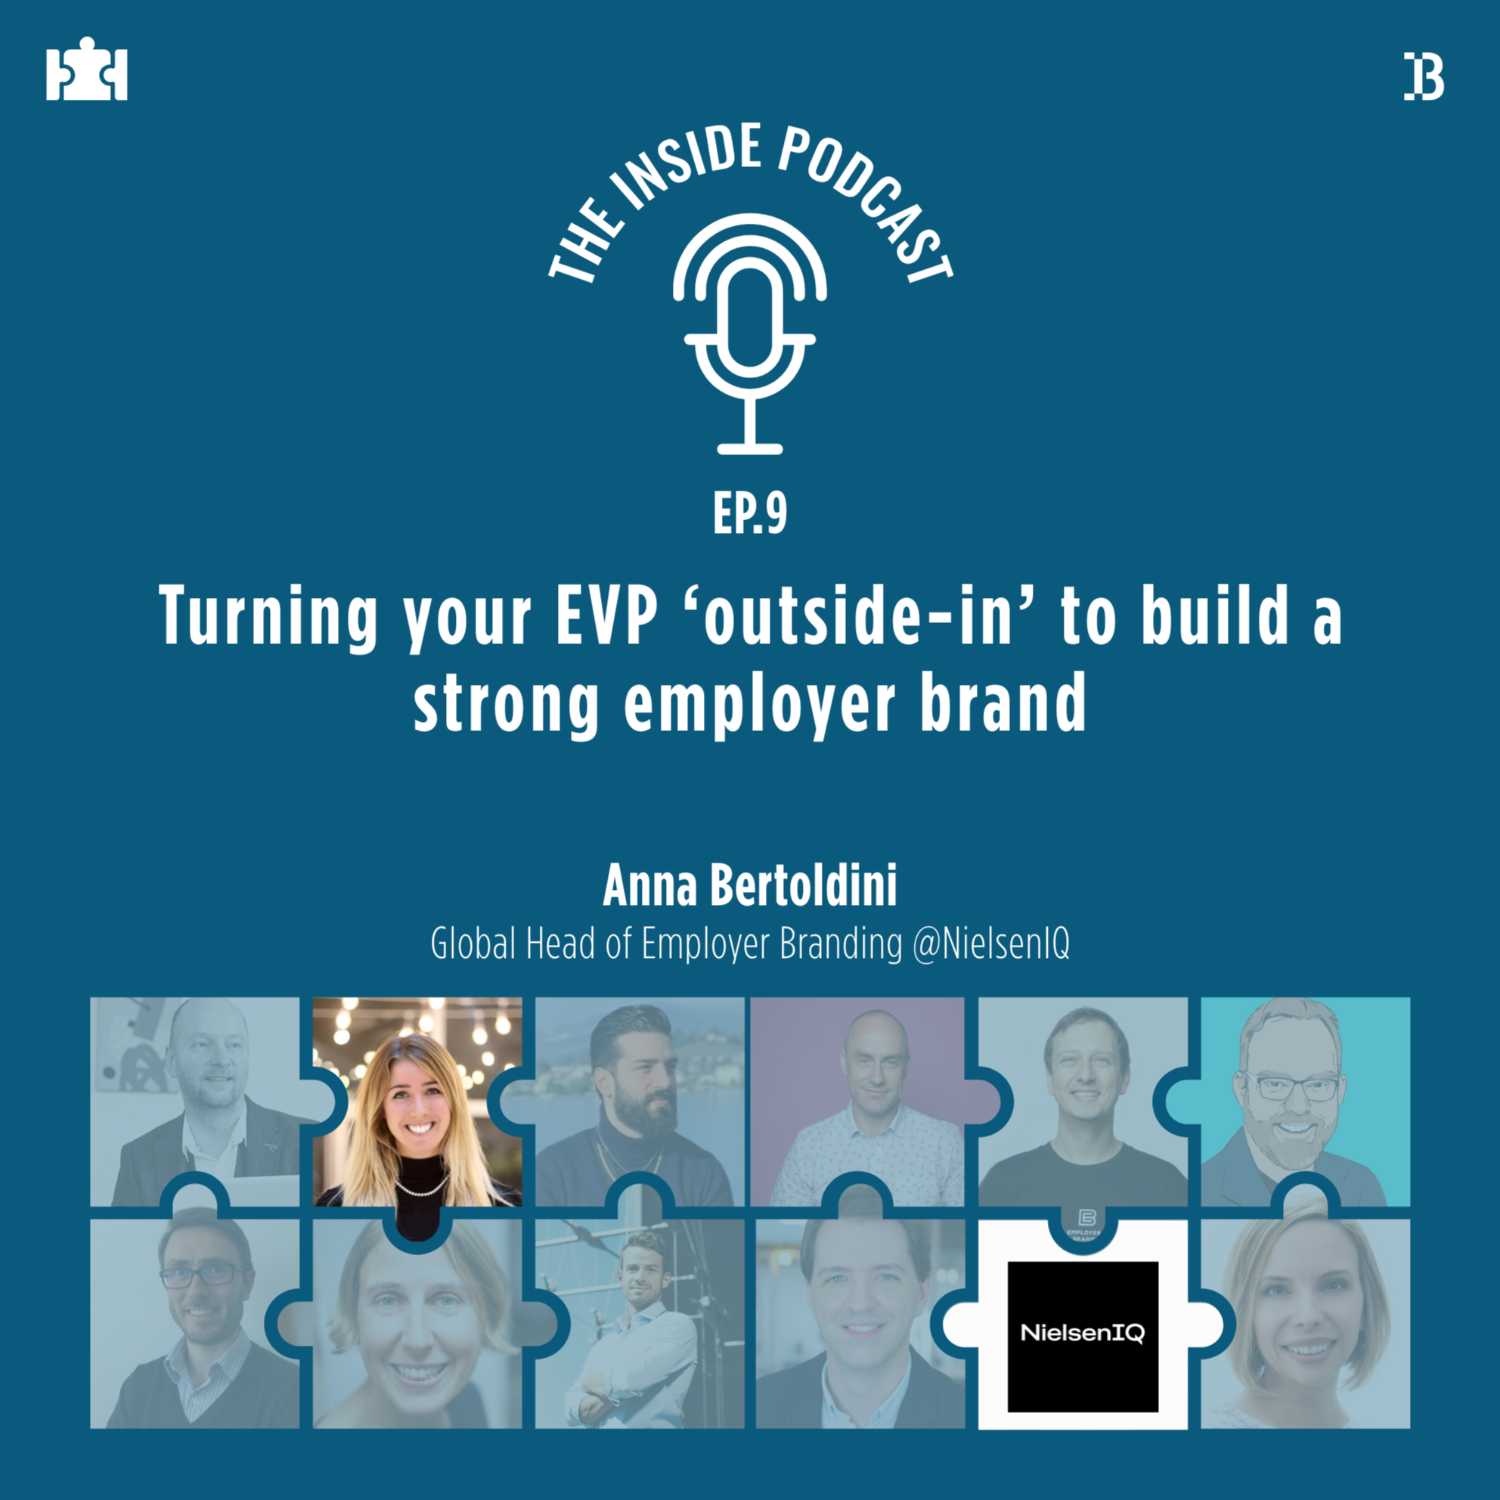 Employer Branding T.I.P S06Ep.9 | “Turning your EVP ‘outside-in’ to build a strong employer brand”,  Anna Bertoldini, Global Head of Employer Branding at NielsenIQ